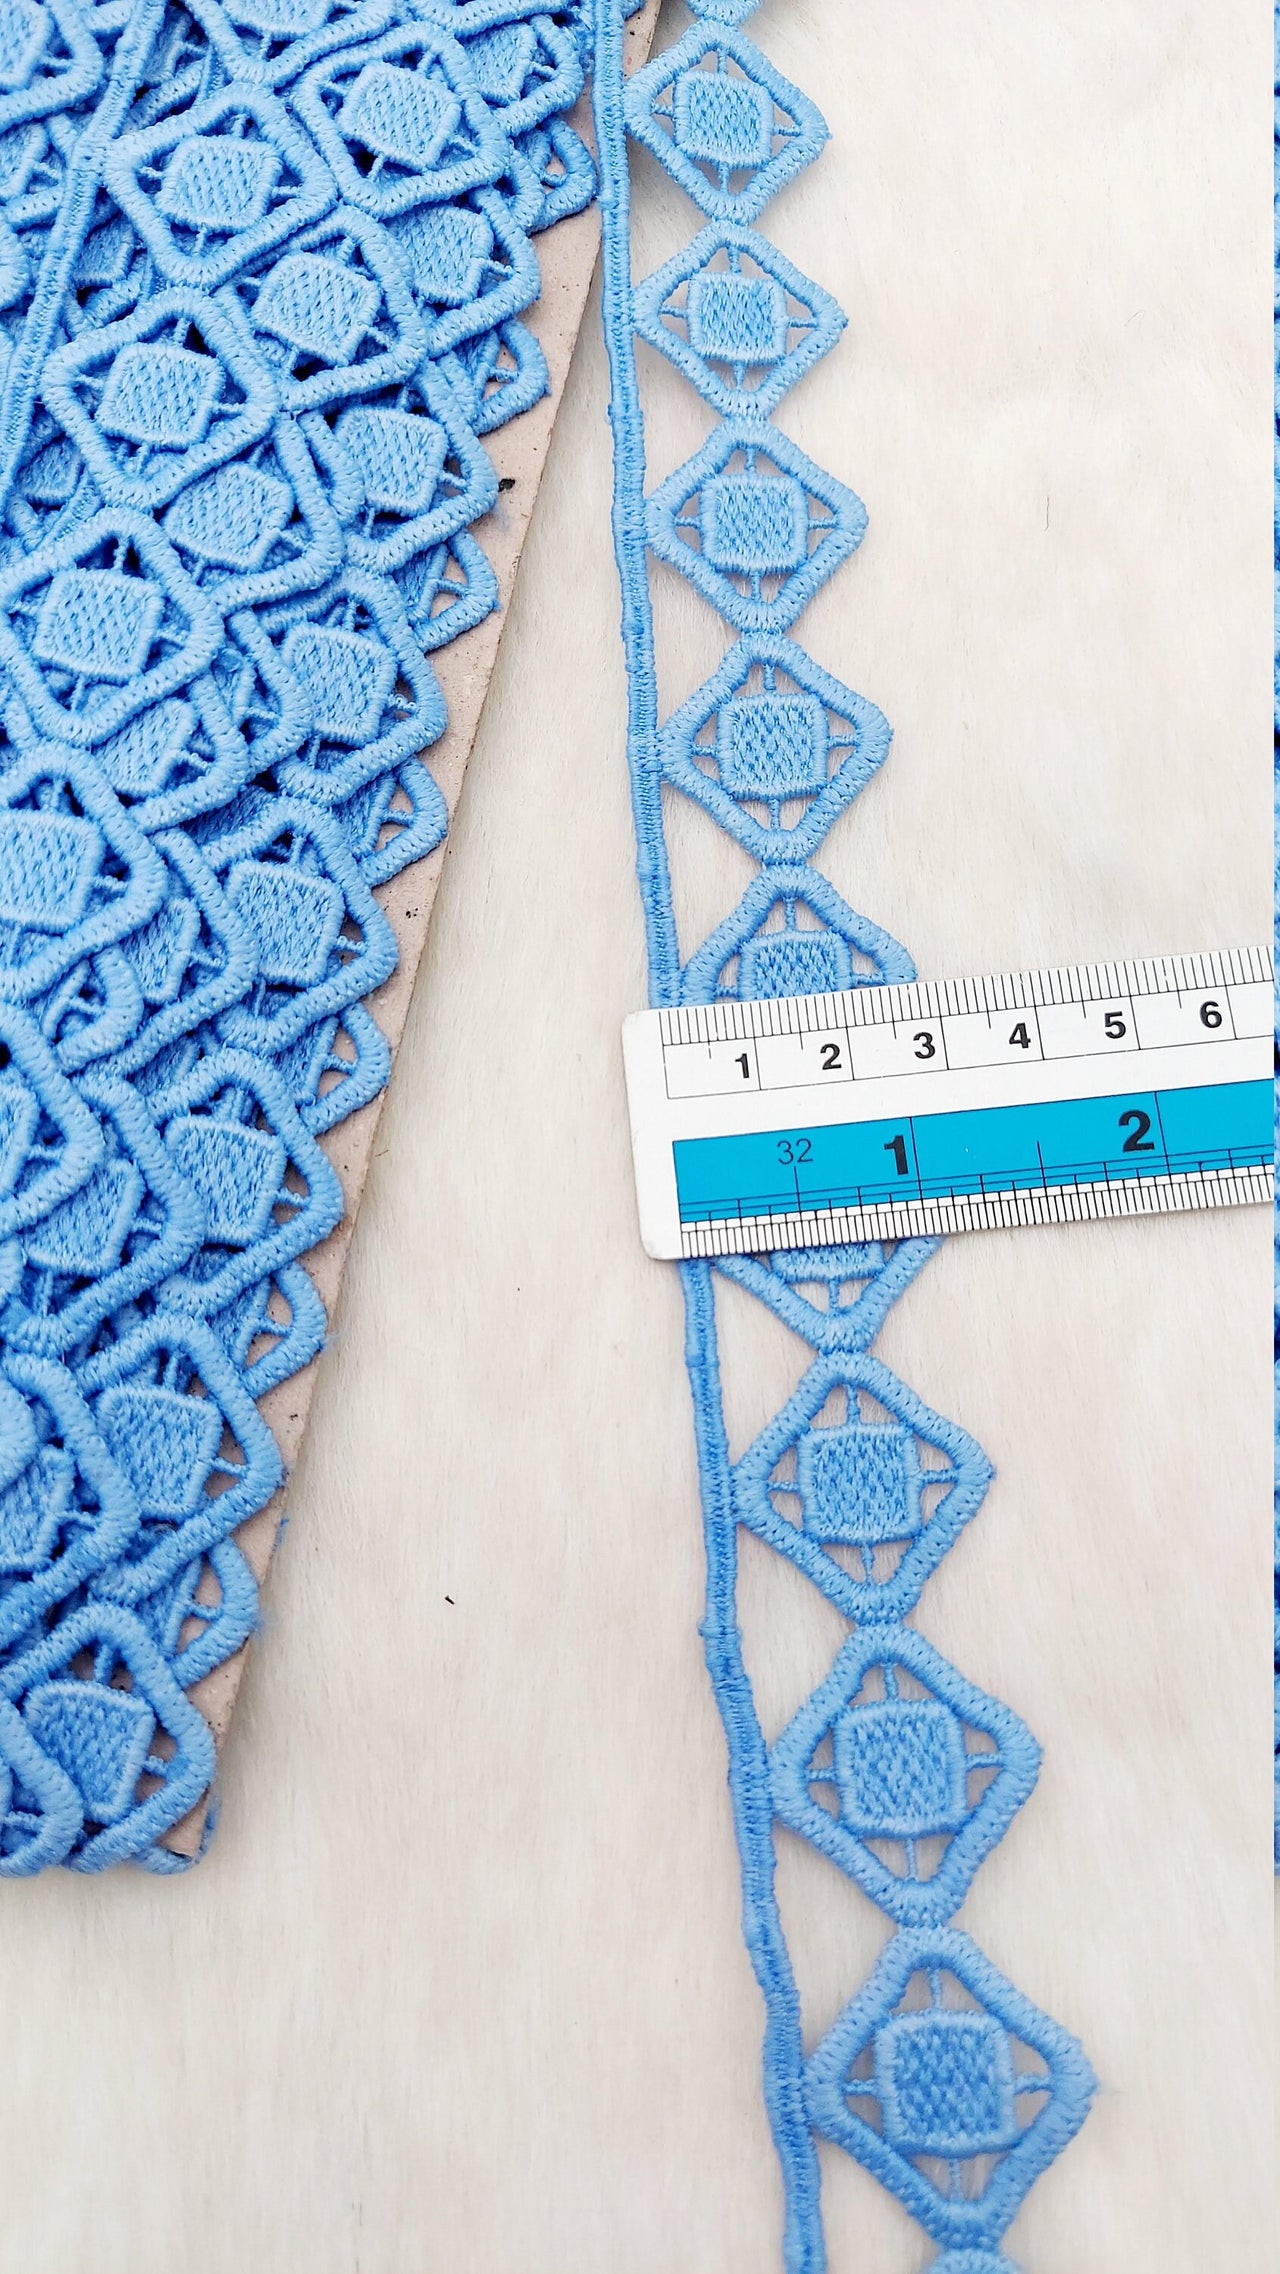 Fringe Trim Geometric Pattern, Cotton Embroidered Crafting Edging Lace Trim, Trim by 10 Yards